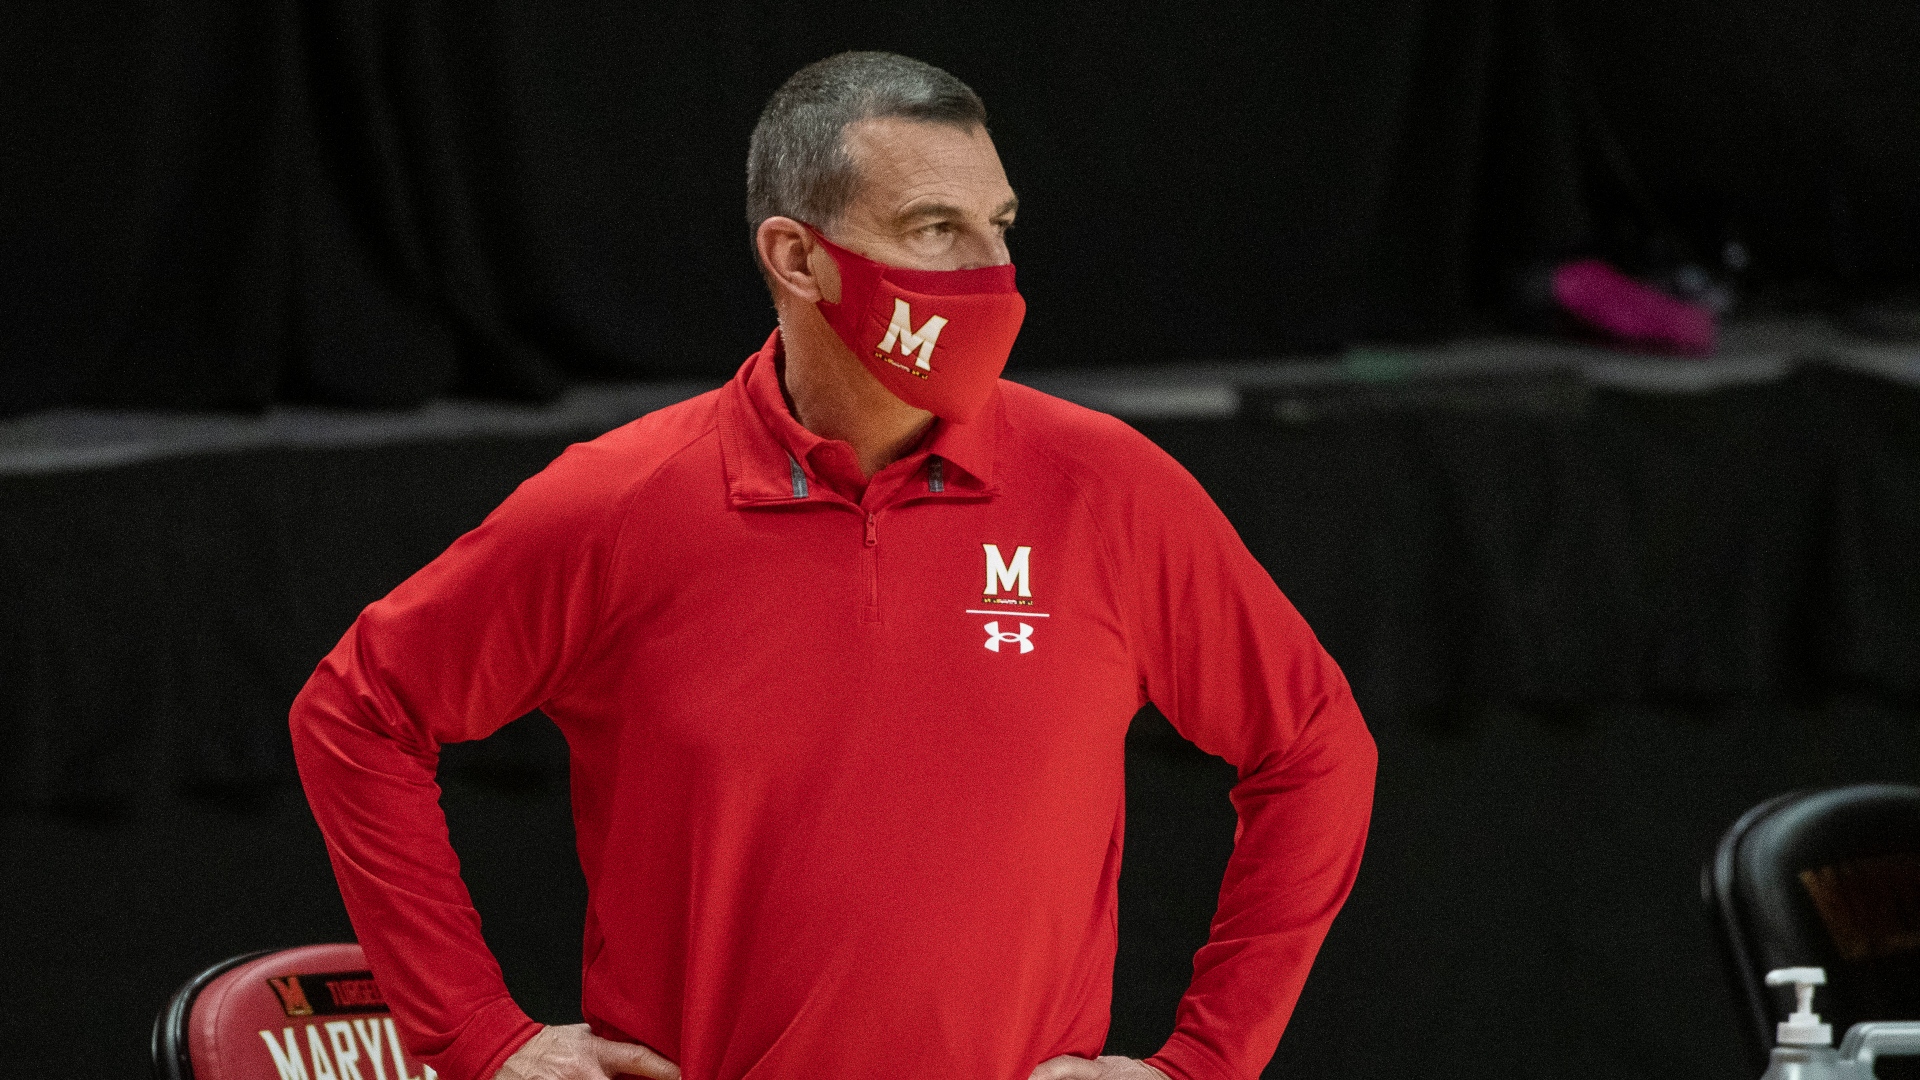 Maryland's Mark Turgeon Describes an Emotional NCAA Tournament Selection Show Viewing